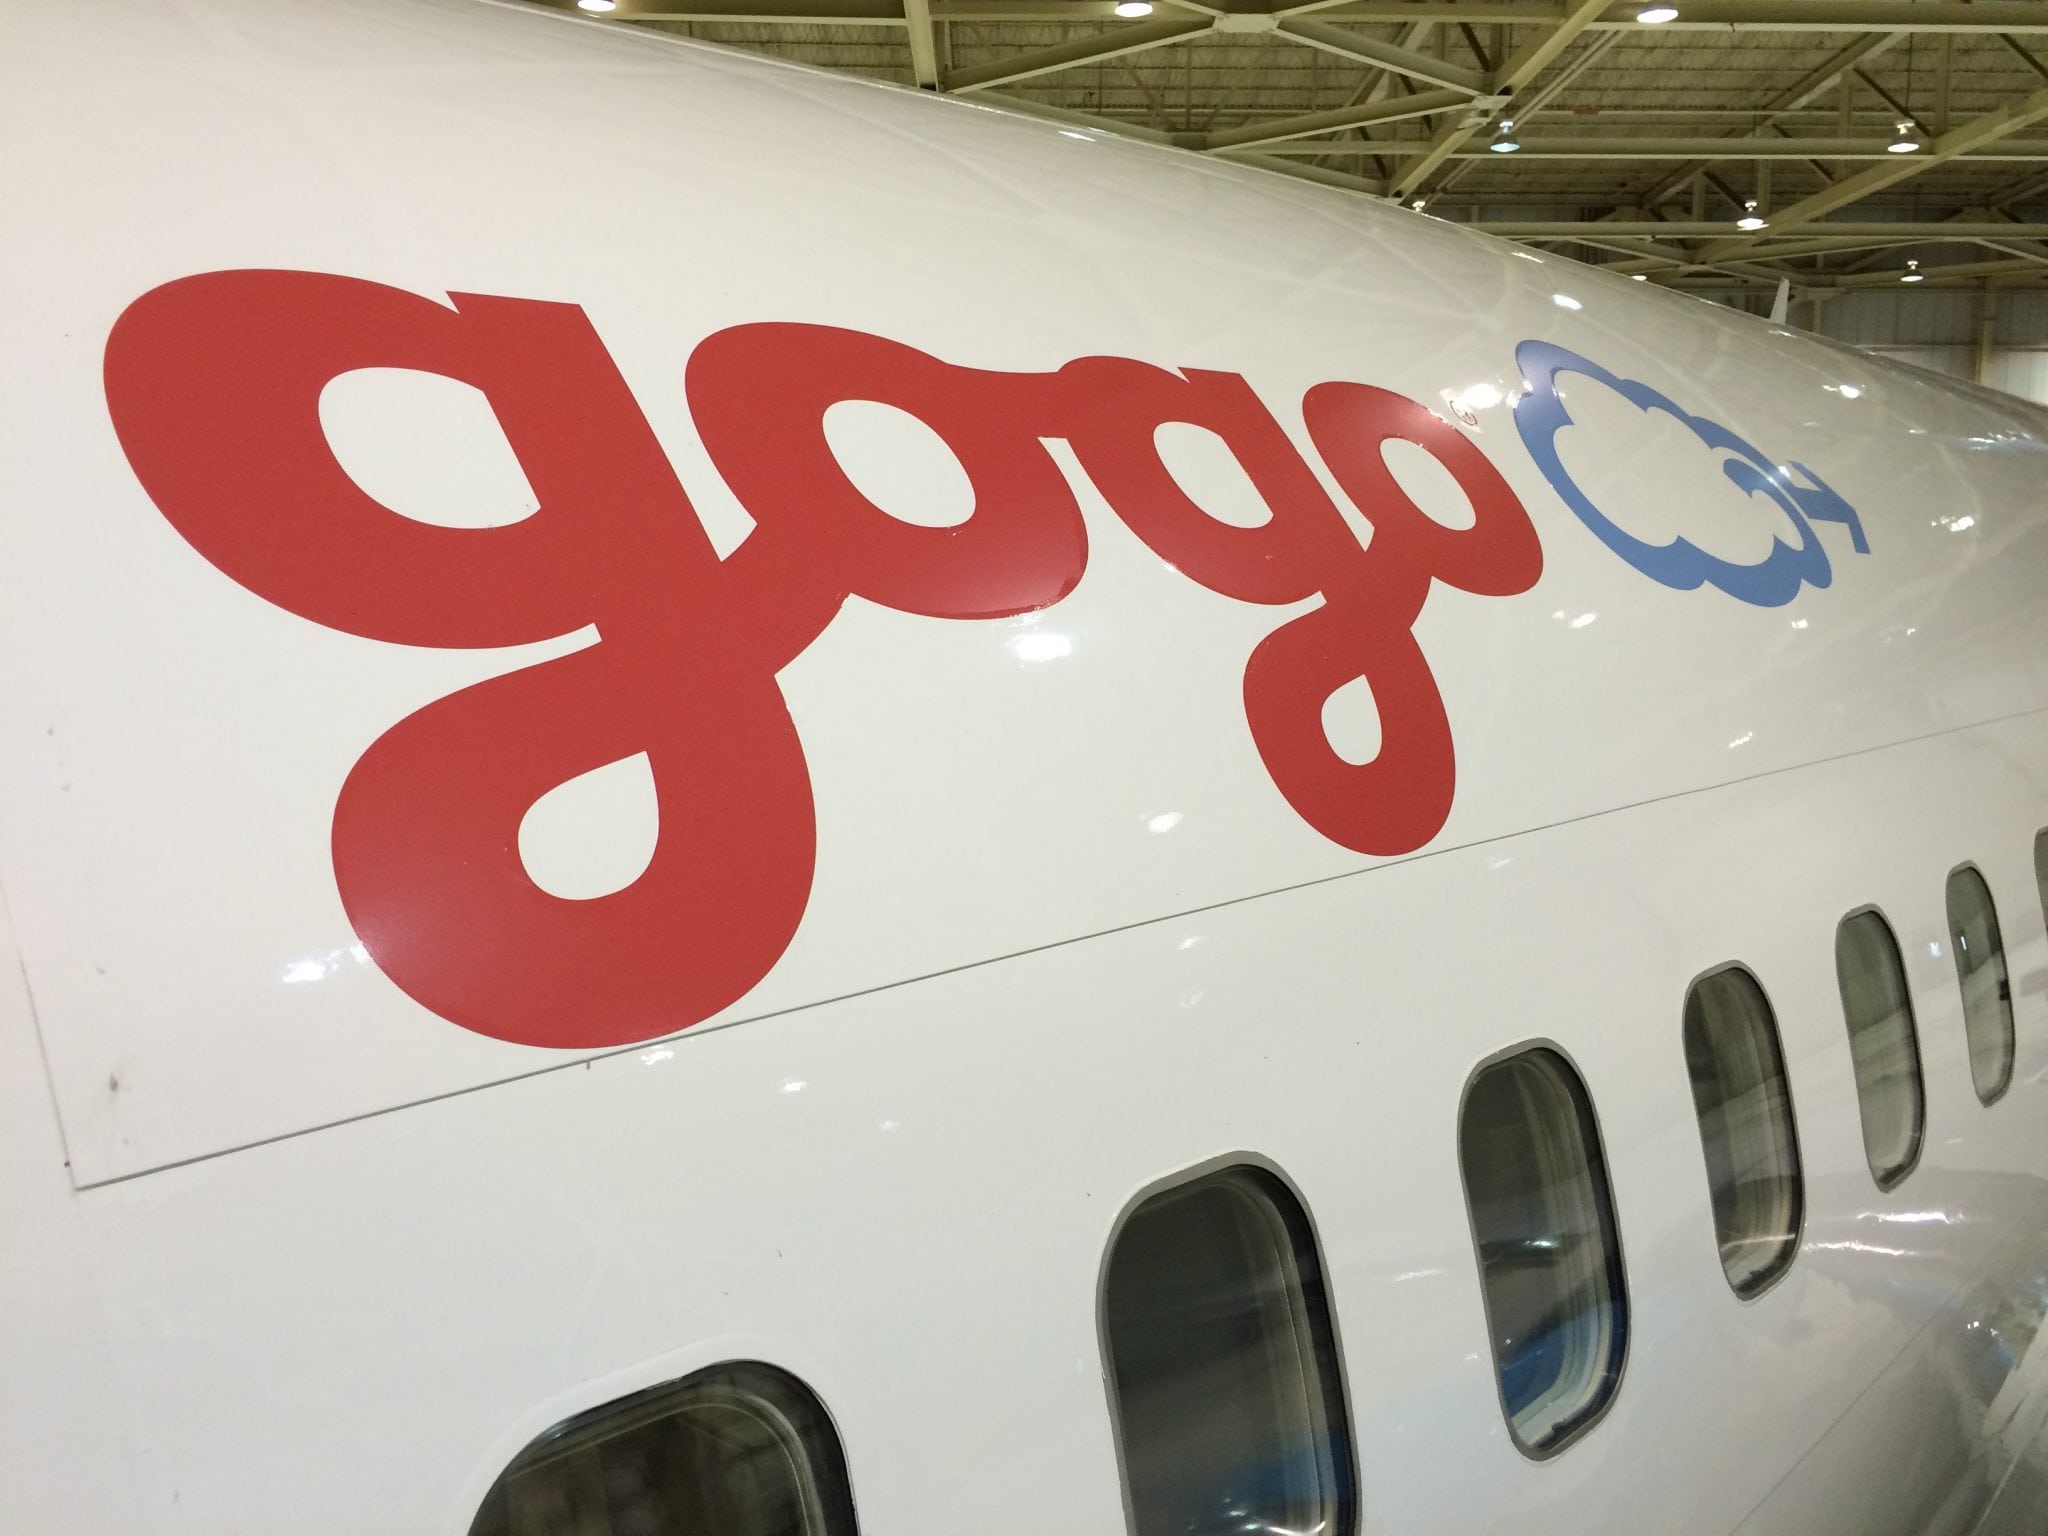 American Airlines has withdrawn its legal dispute with IFC provider Gogo